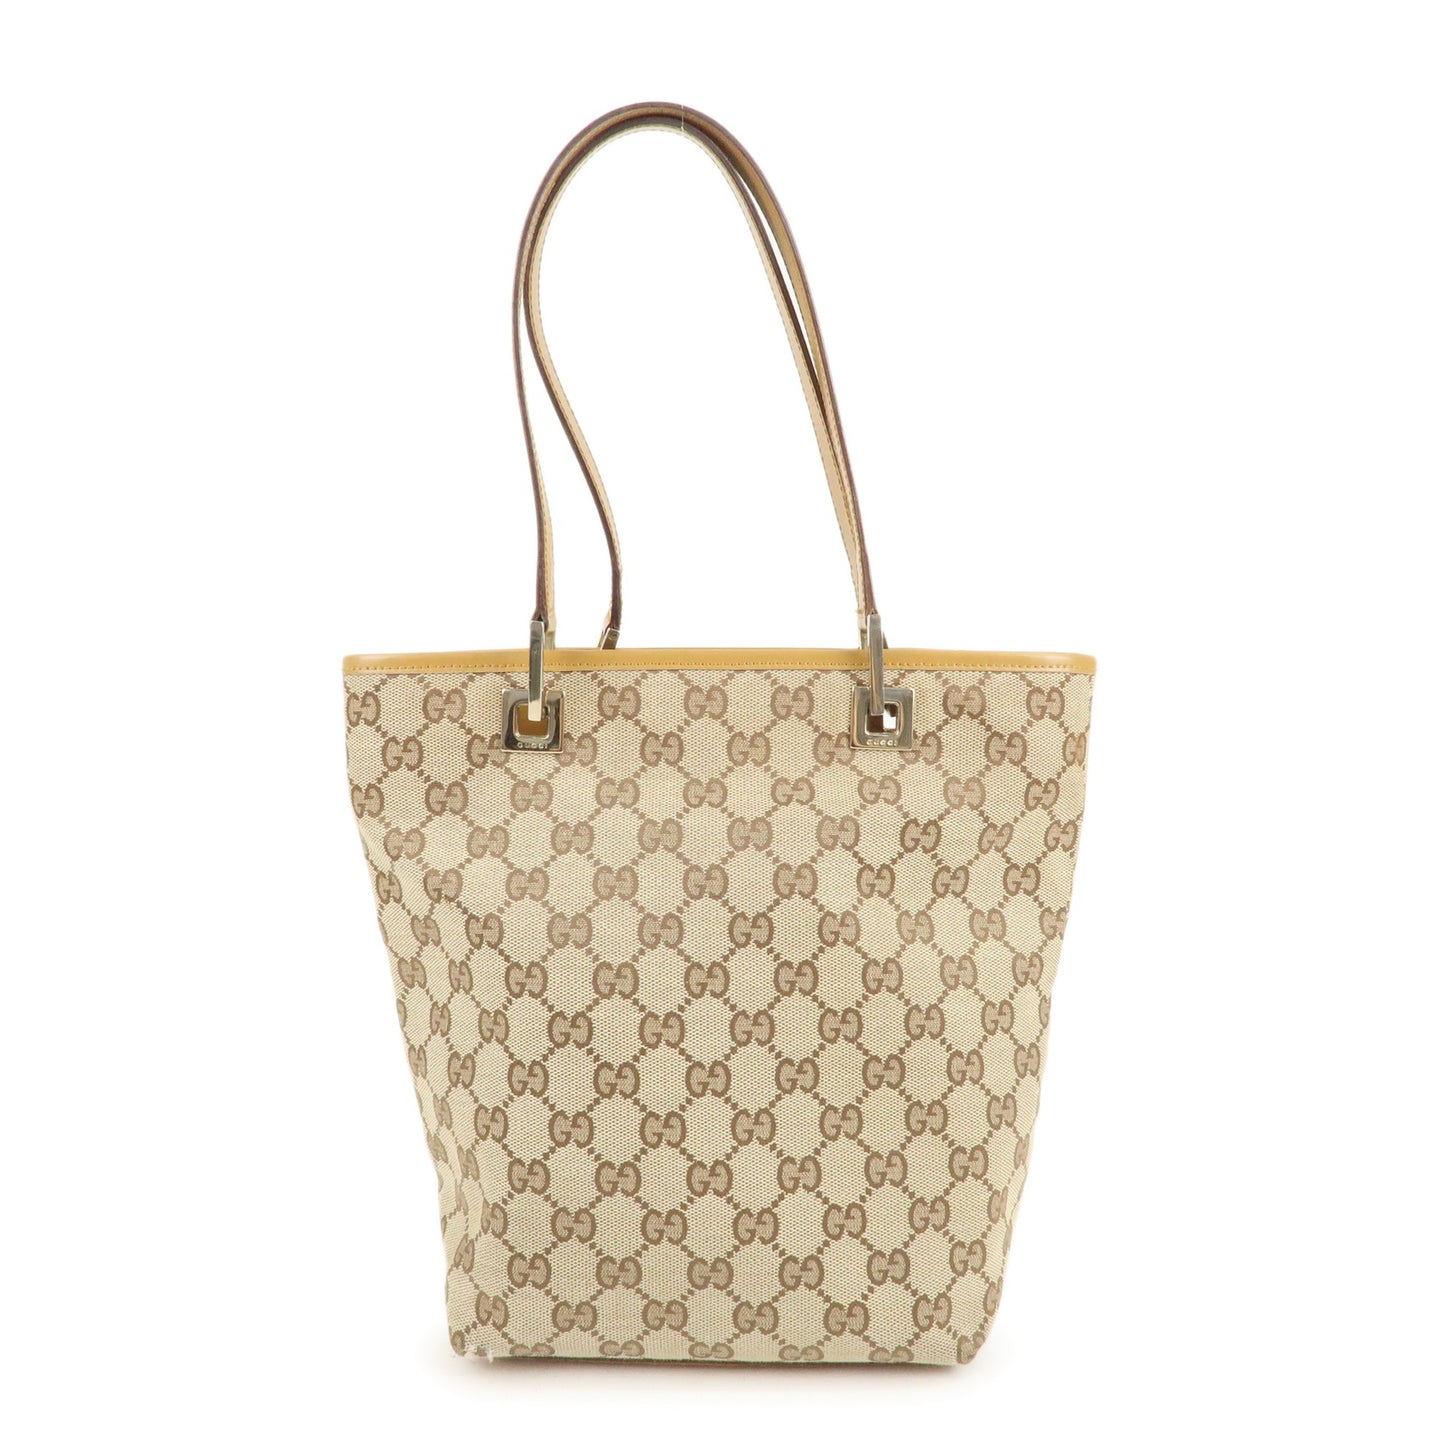 GUCCI-GG-Canvas-Leather-Tote-Bag-Beige-Light-Brown-002.1099